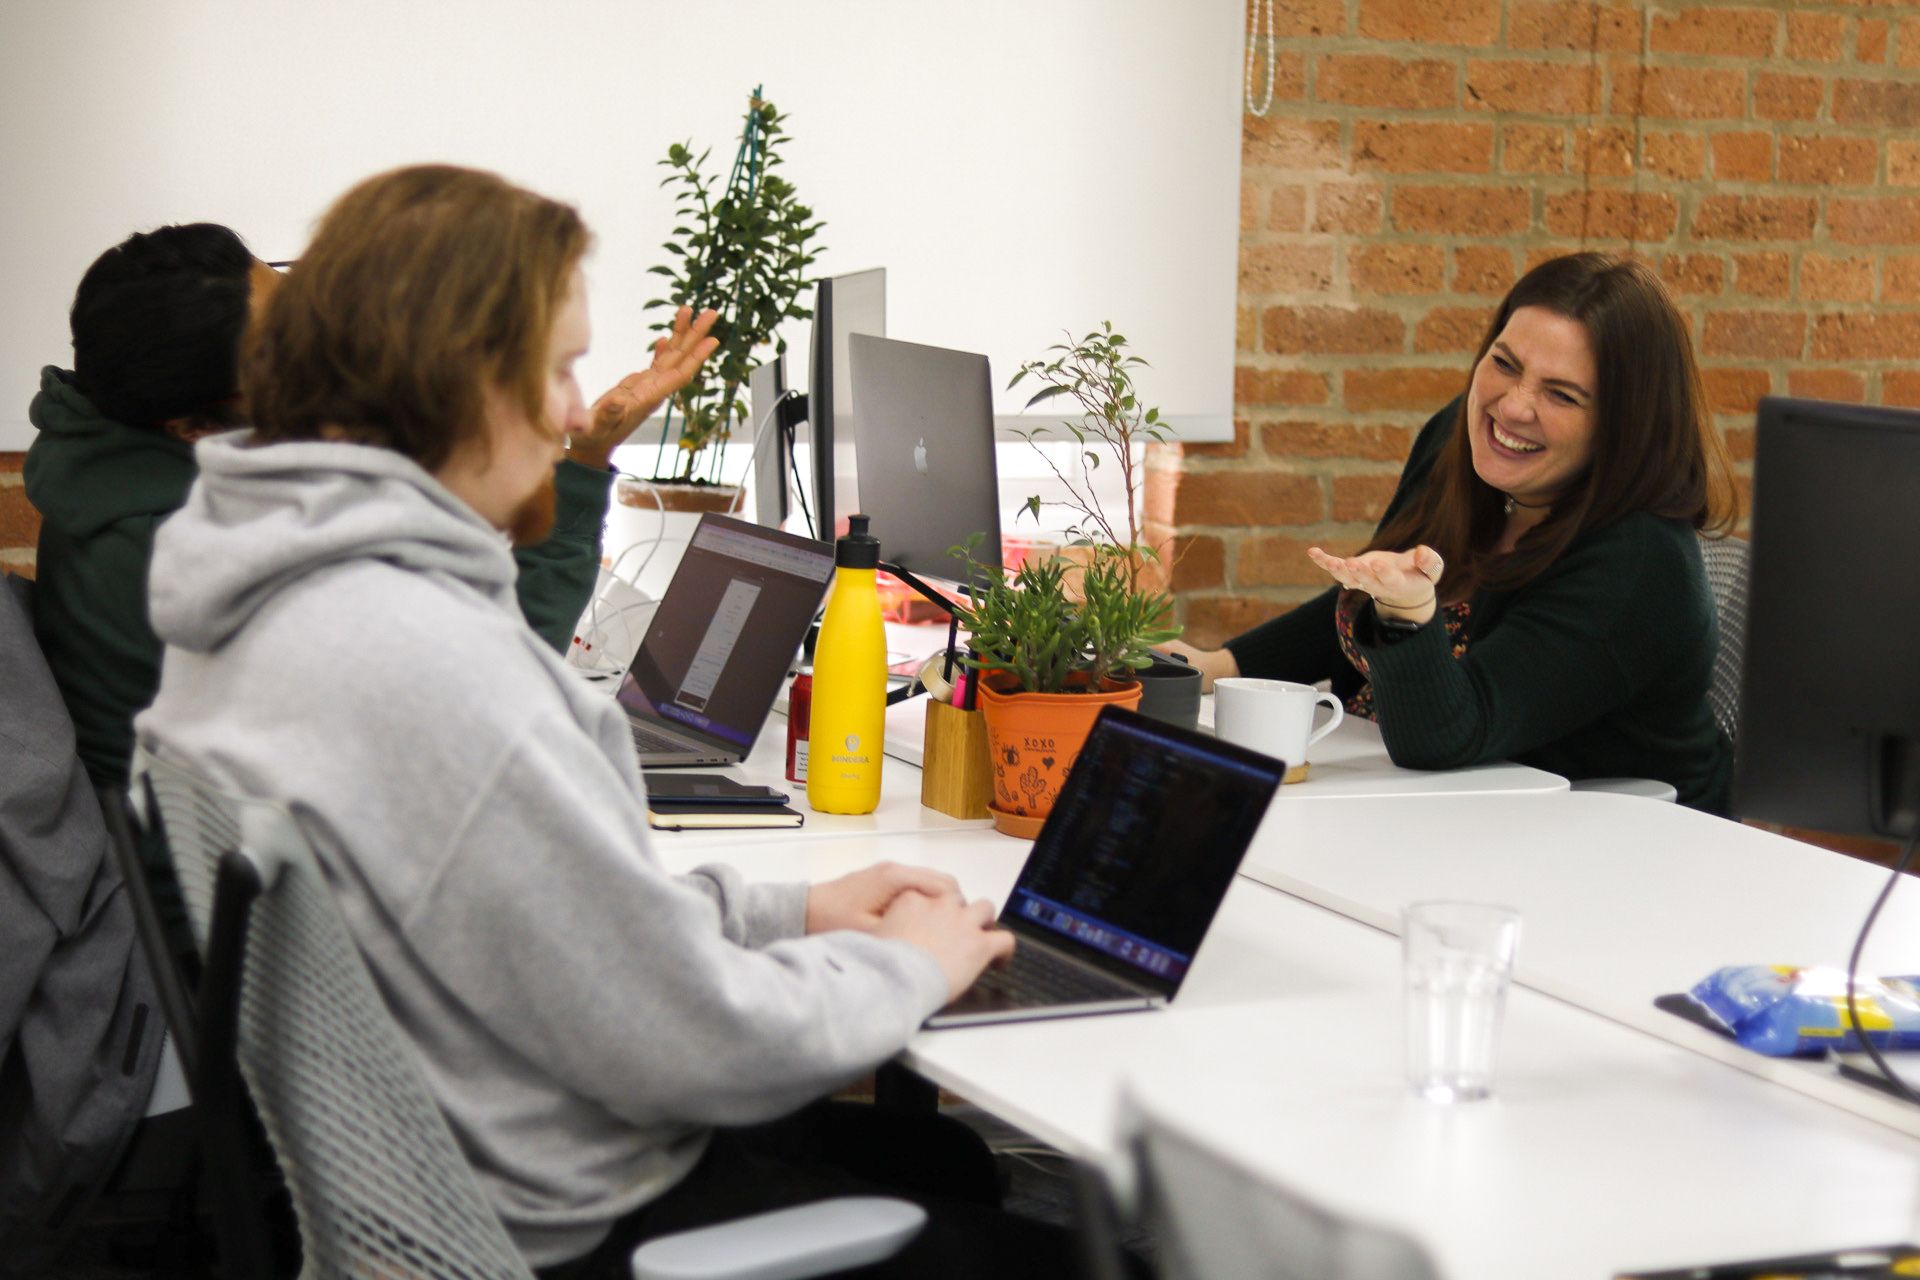 Three female Minders are laughing while working at their desks and laptops.